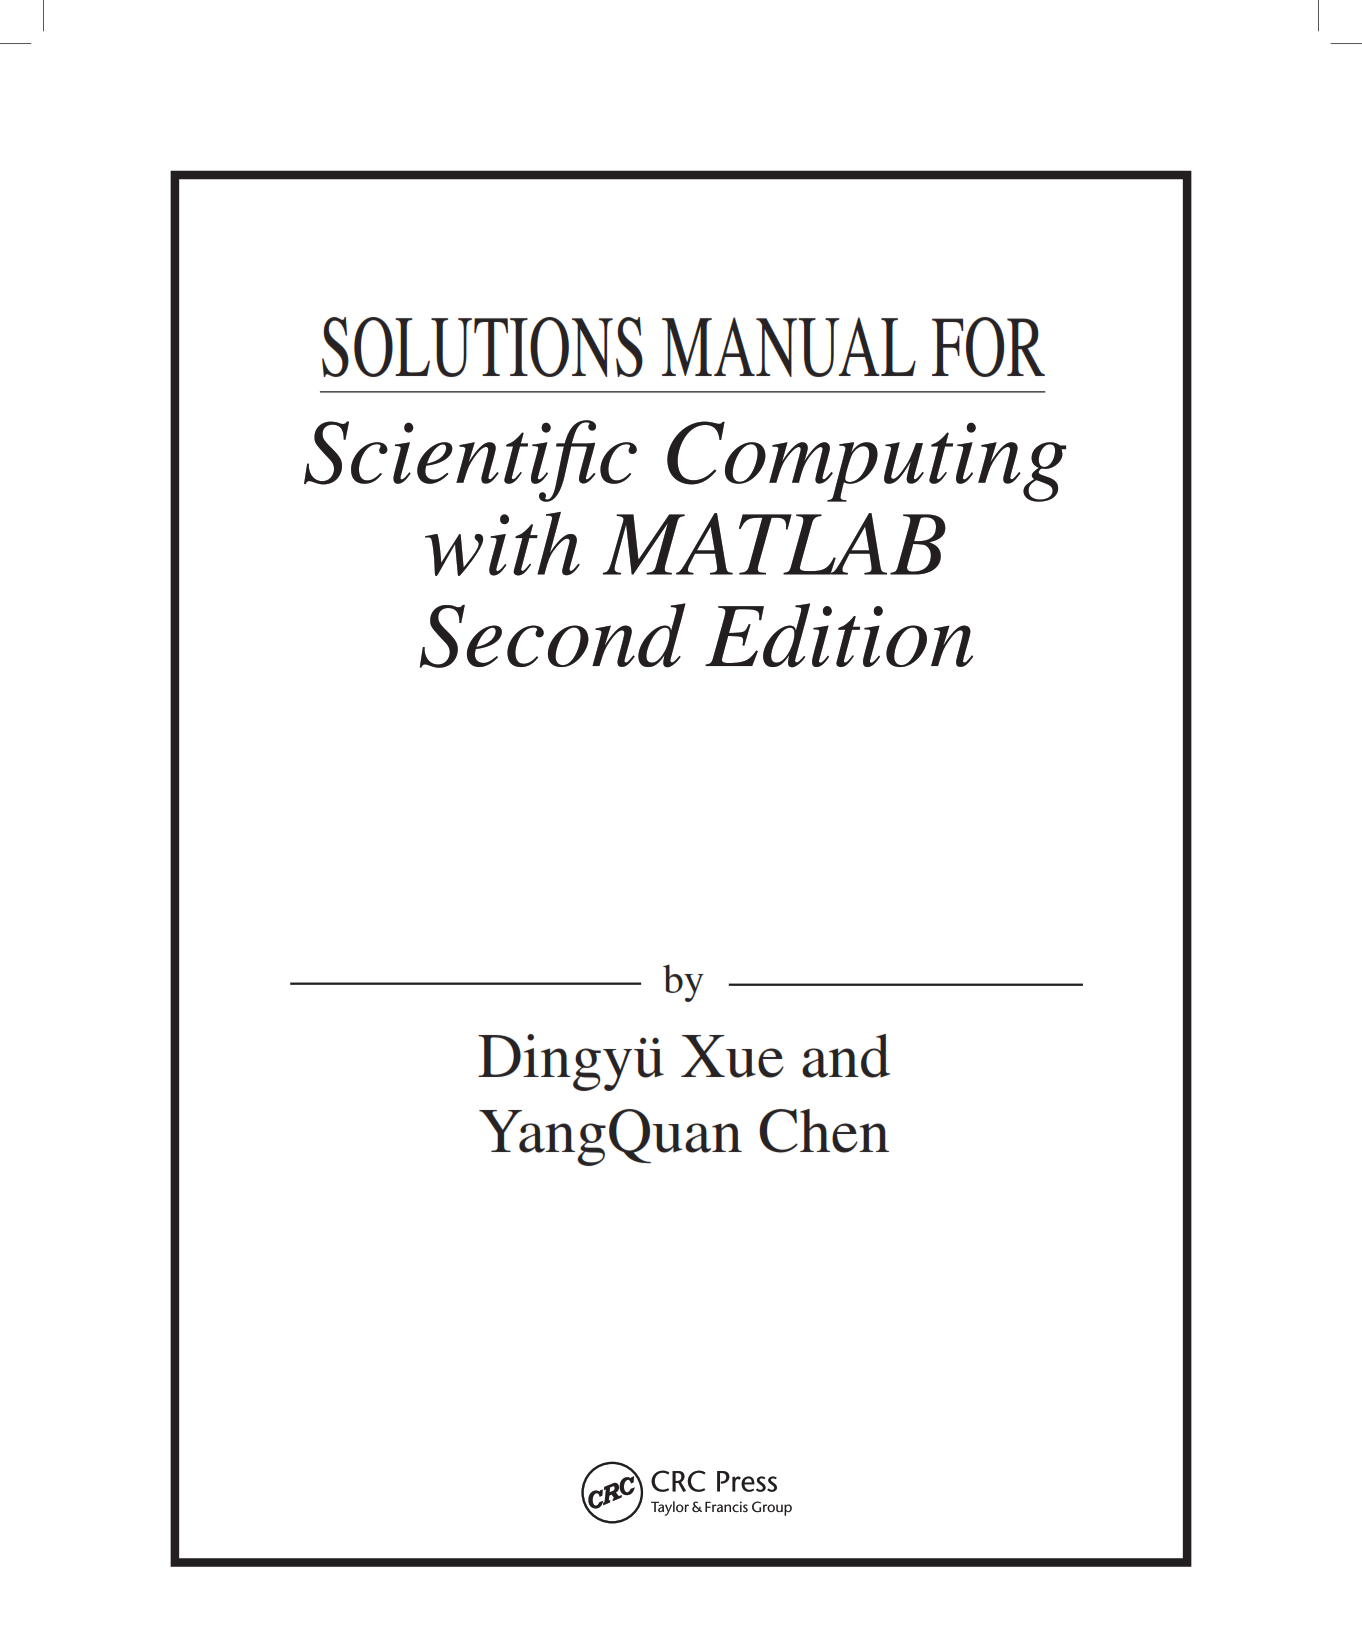 download free scientific computing with Matlab Dingyu Xue & YangQuan Chen 2nd edition solutions manual pdf